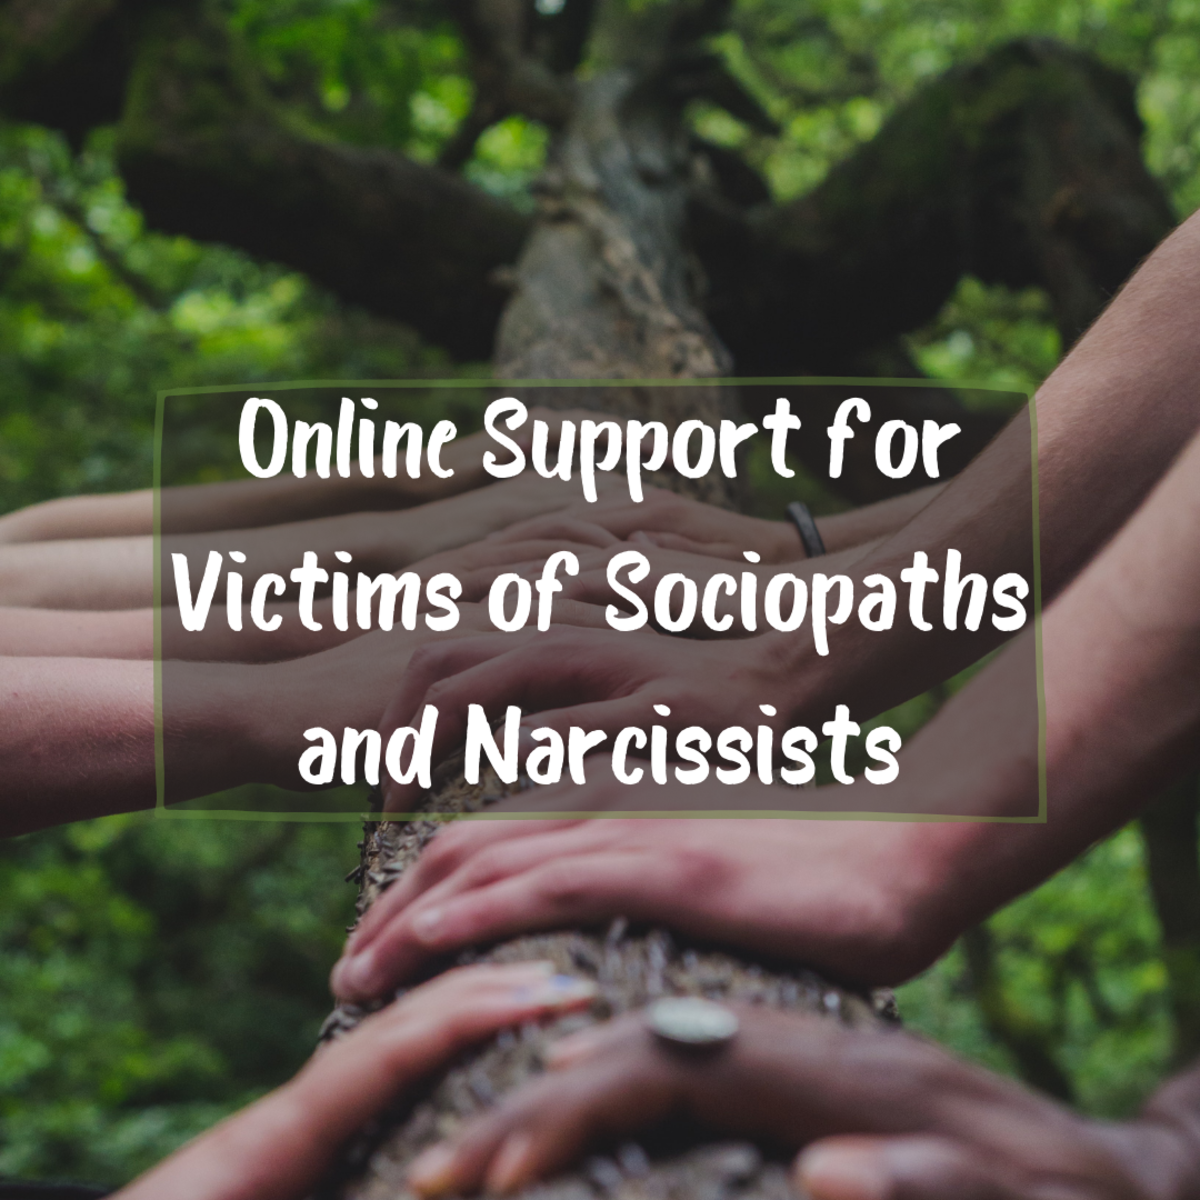 Read on to find great online support for victims of sociopaths and narcissists.